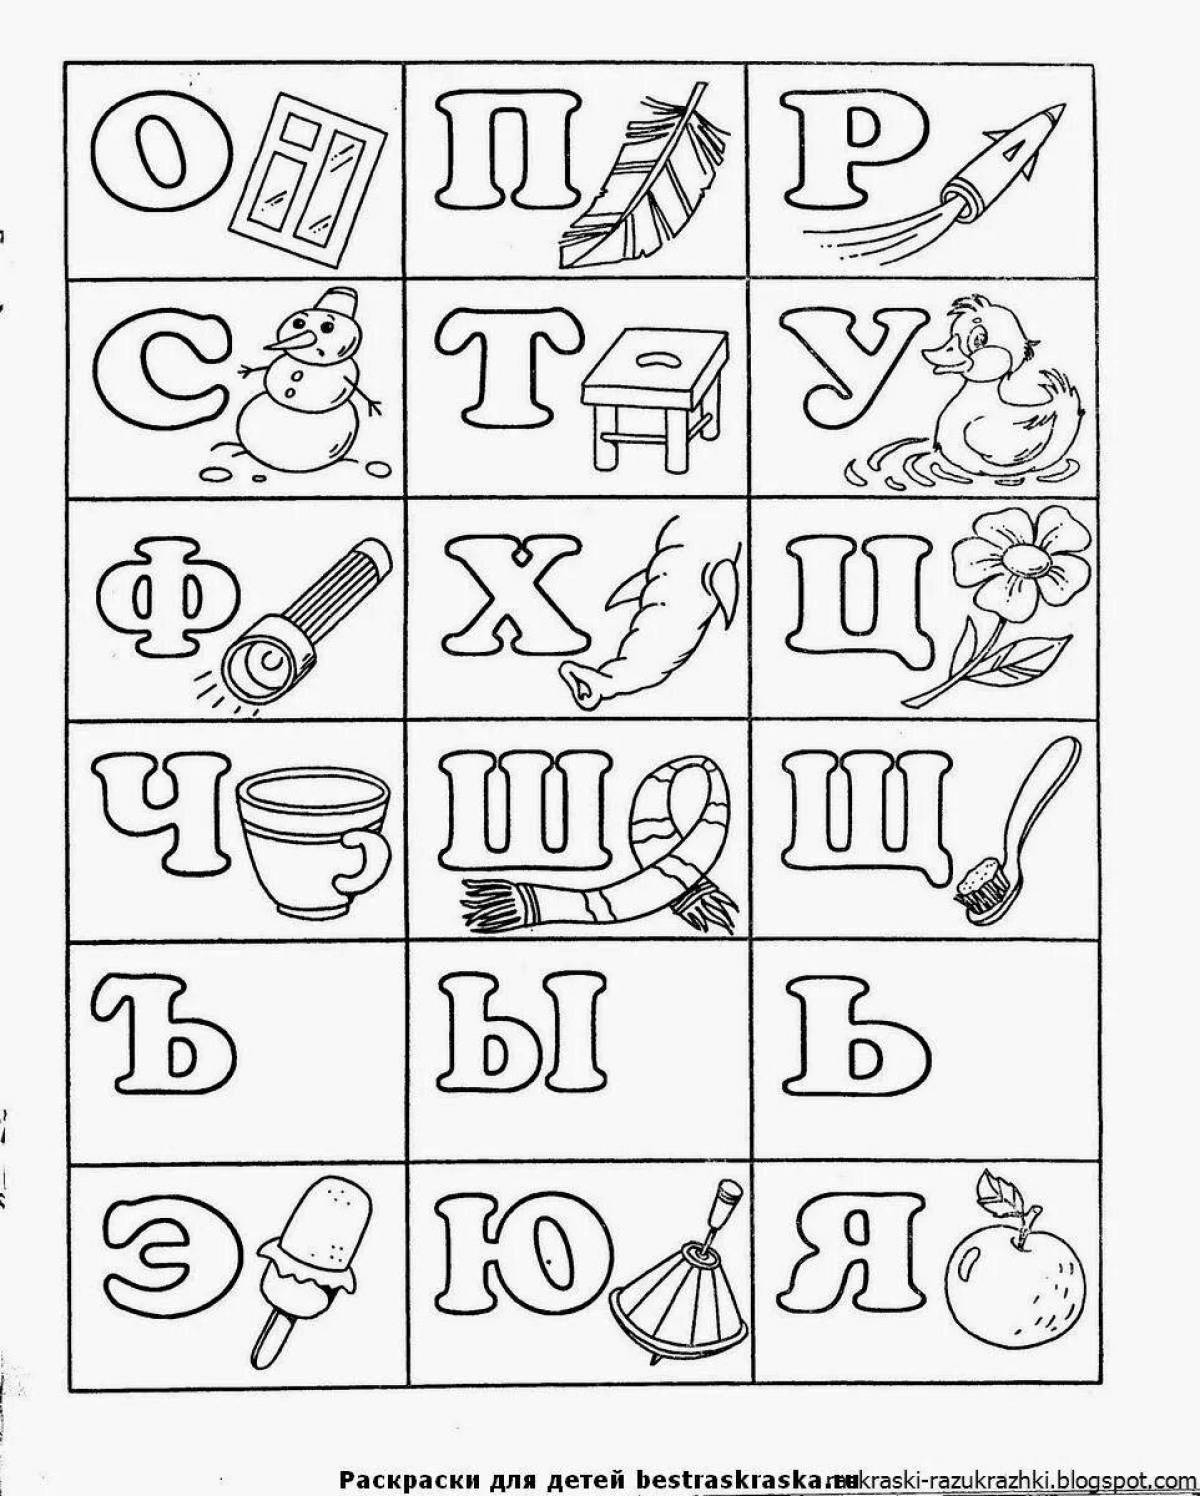 Bright coloring of the Russian alphabet